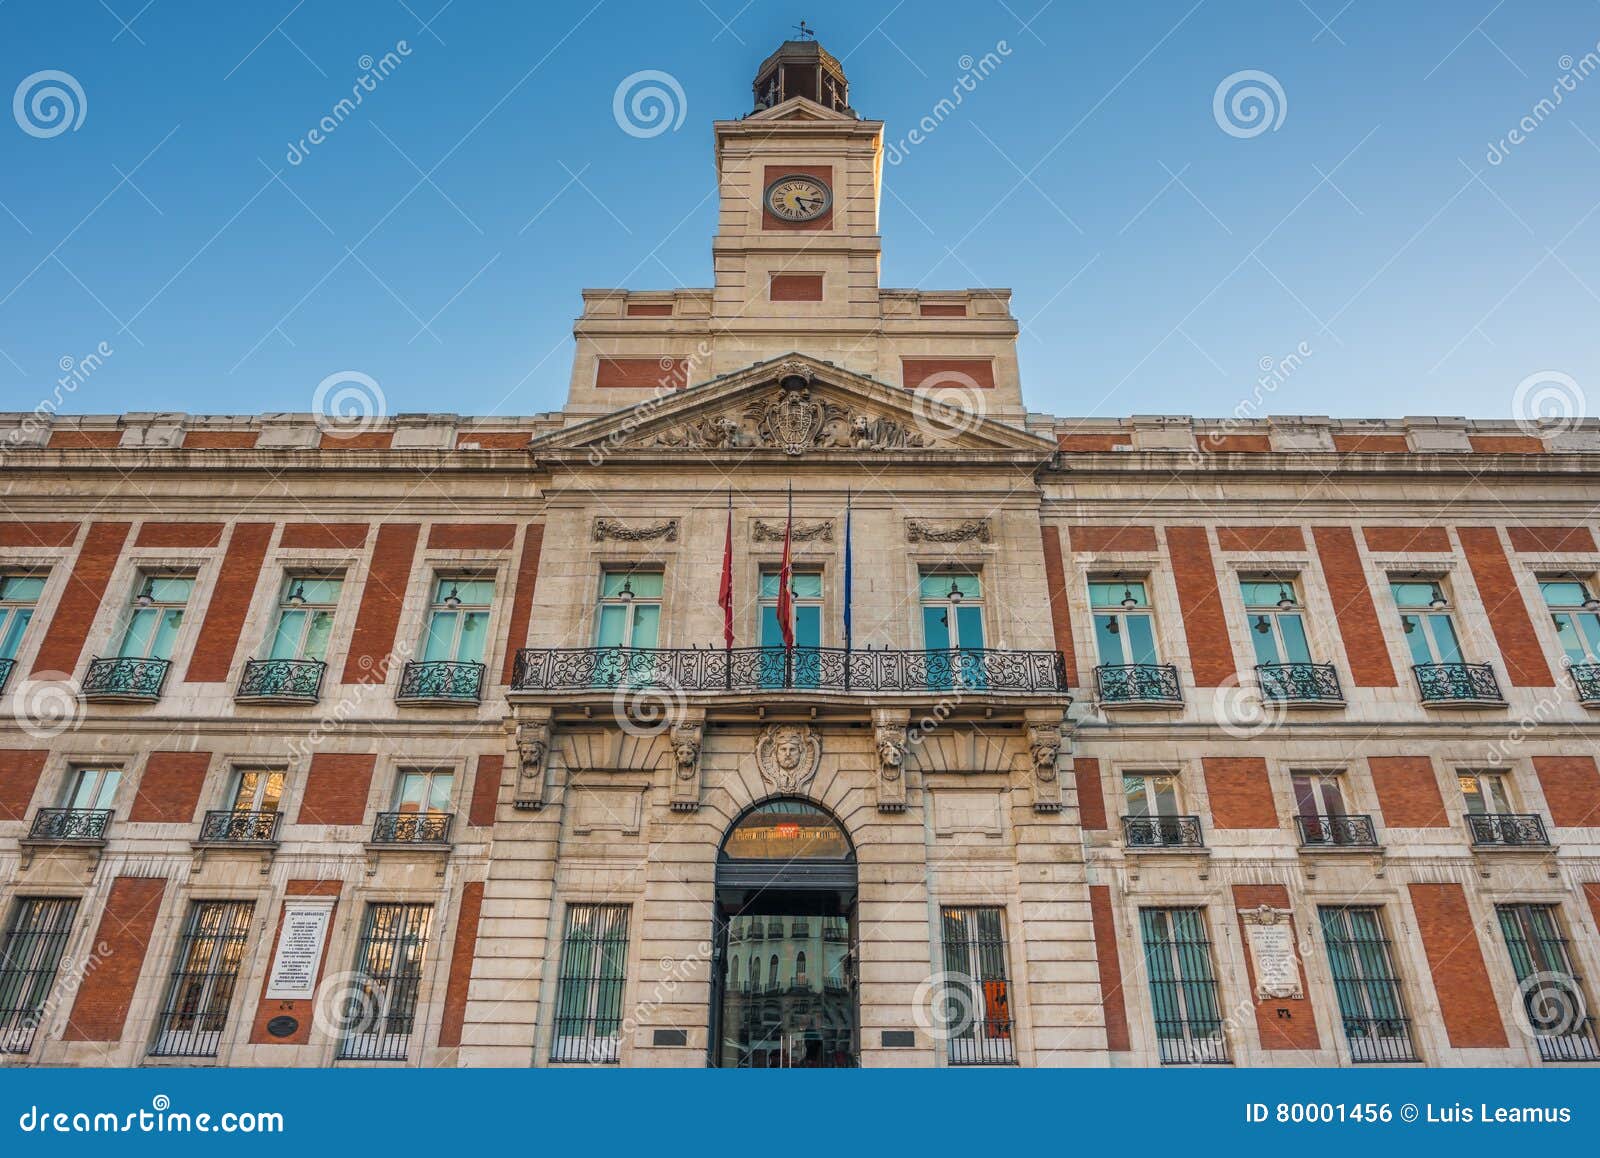 the old post office building, puerta del sol, madrid, spain